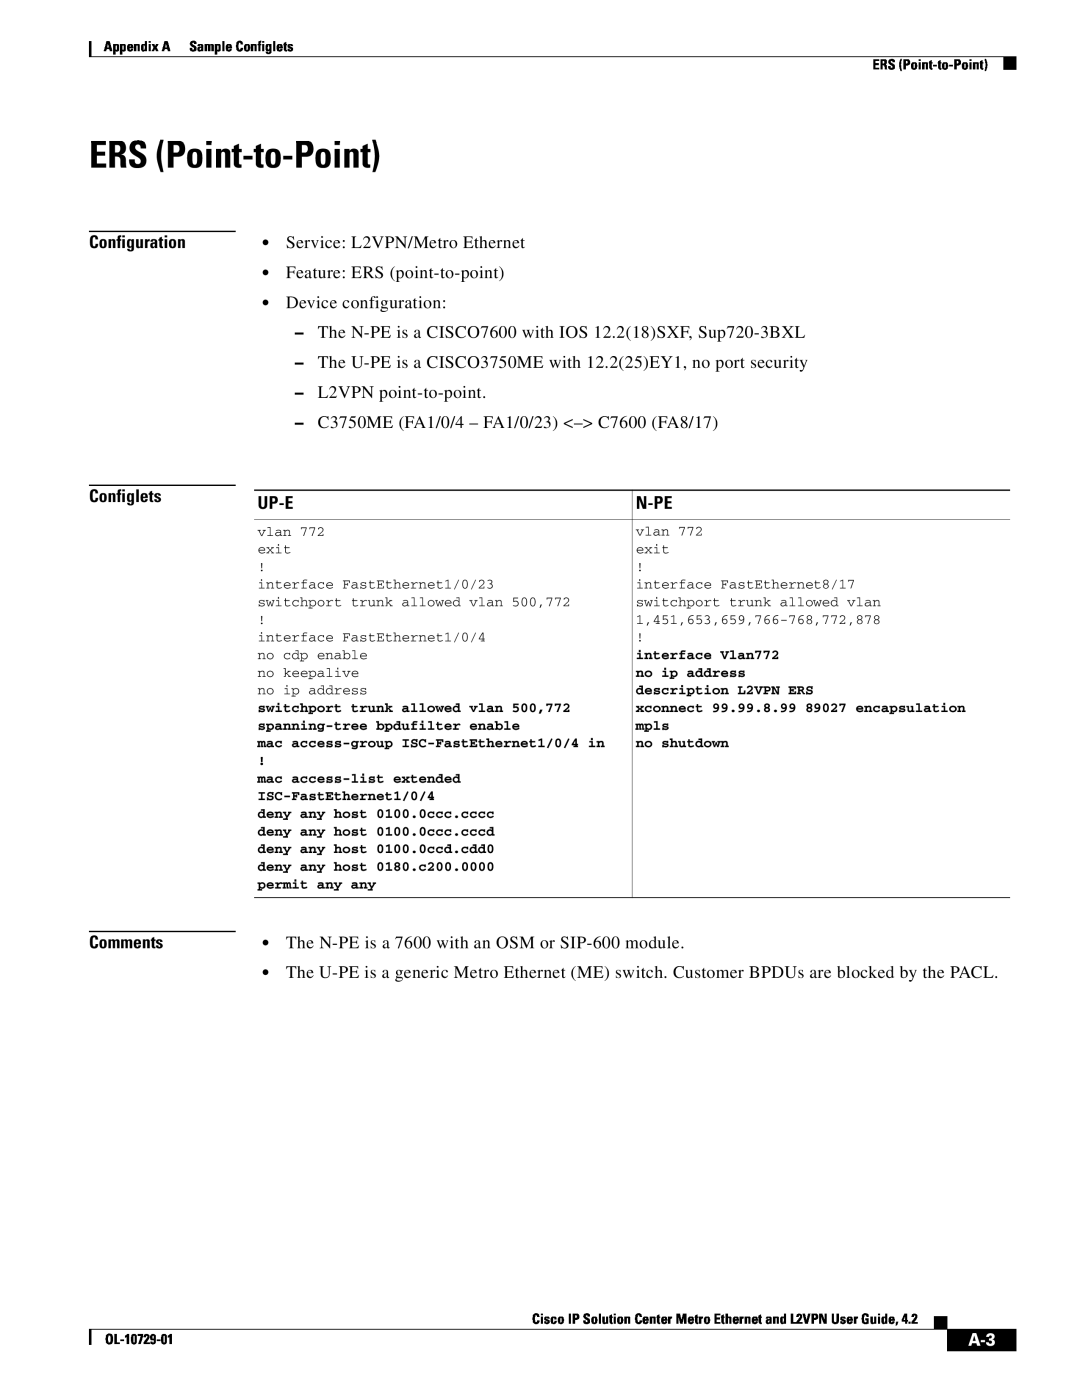 Cisco Systems OL-10729-01 appendix ERS Point-to-Point, Configuration Configlets, Up-E, N-Pe, Comments 